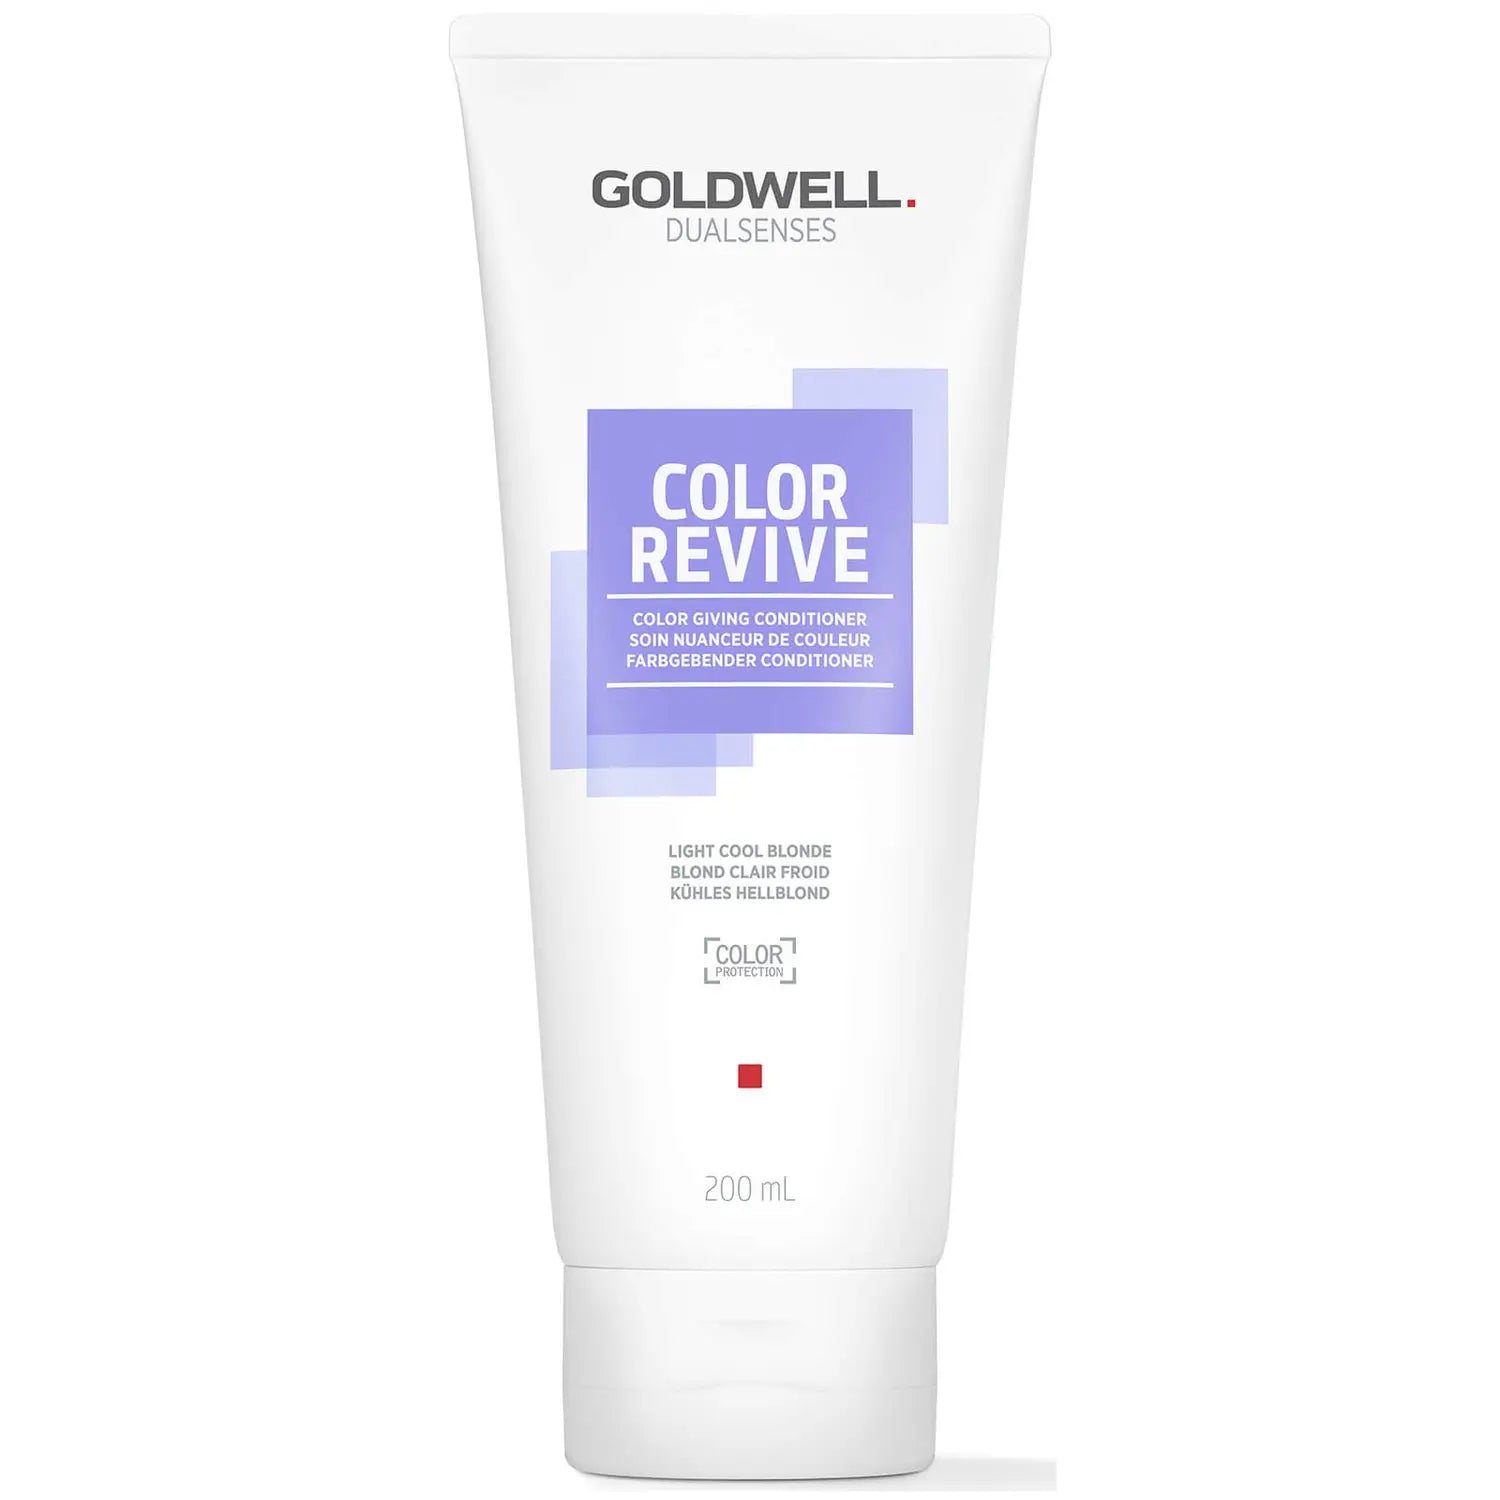 GOLDWELL color revive shampooing